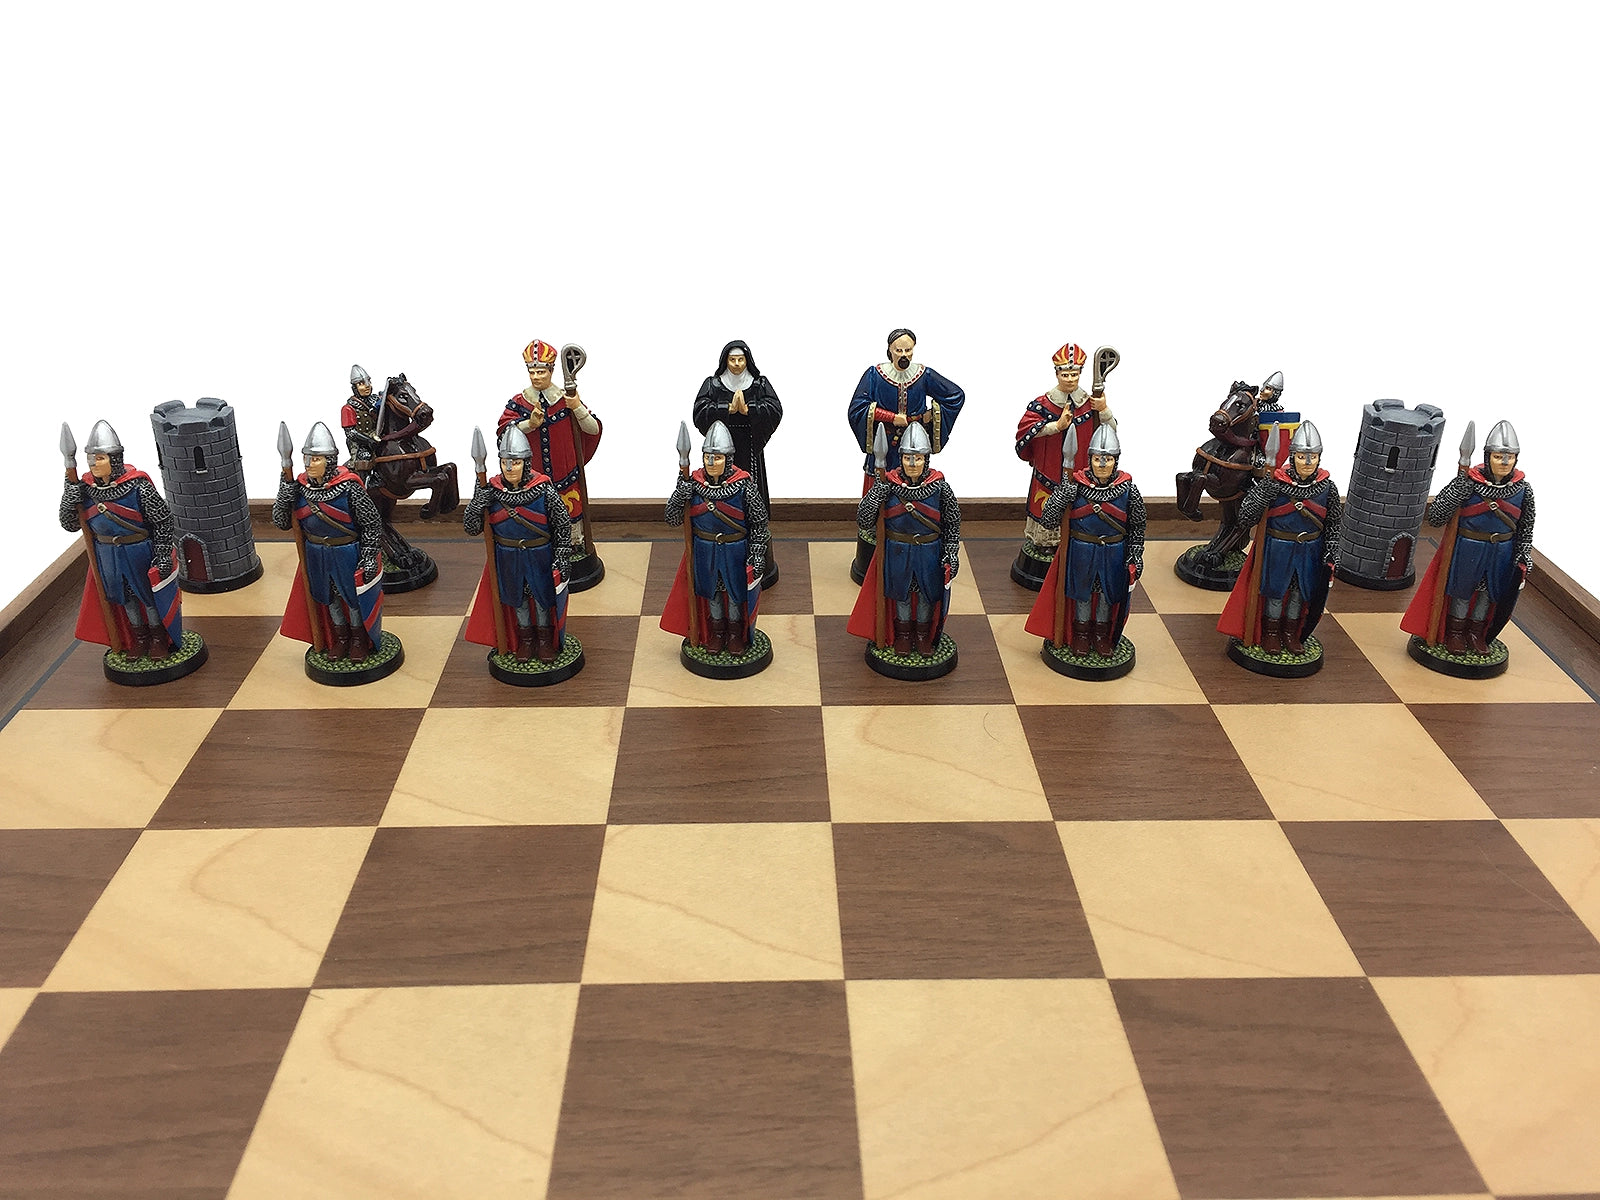 Toy soldier miniature army men Robin Hood Chess Set.